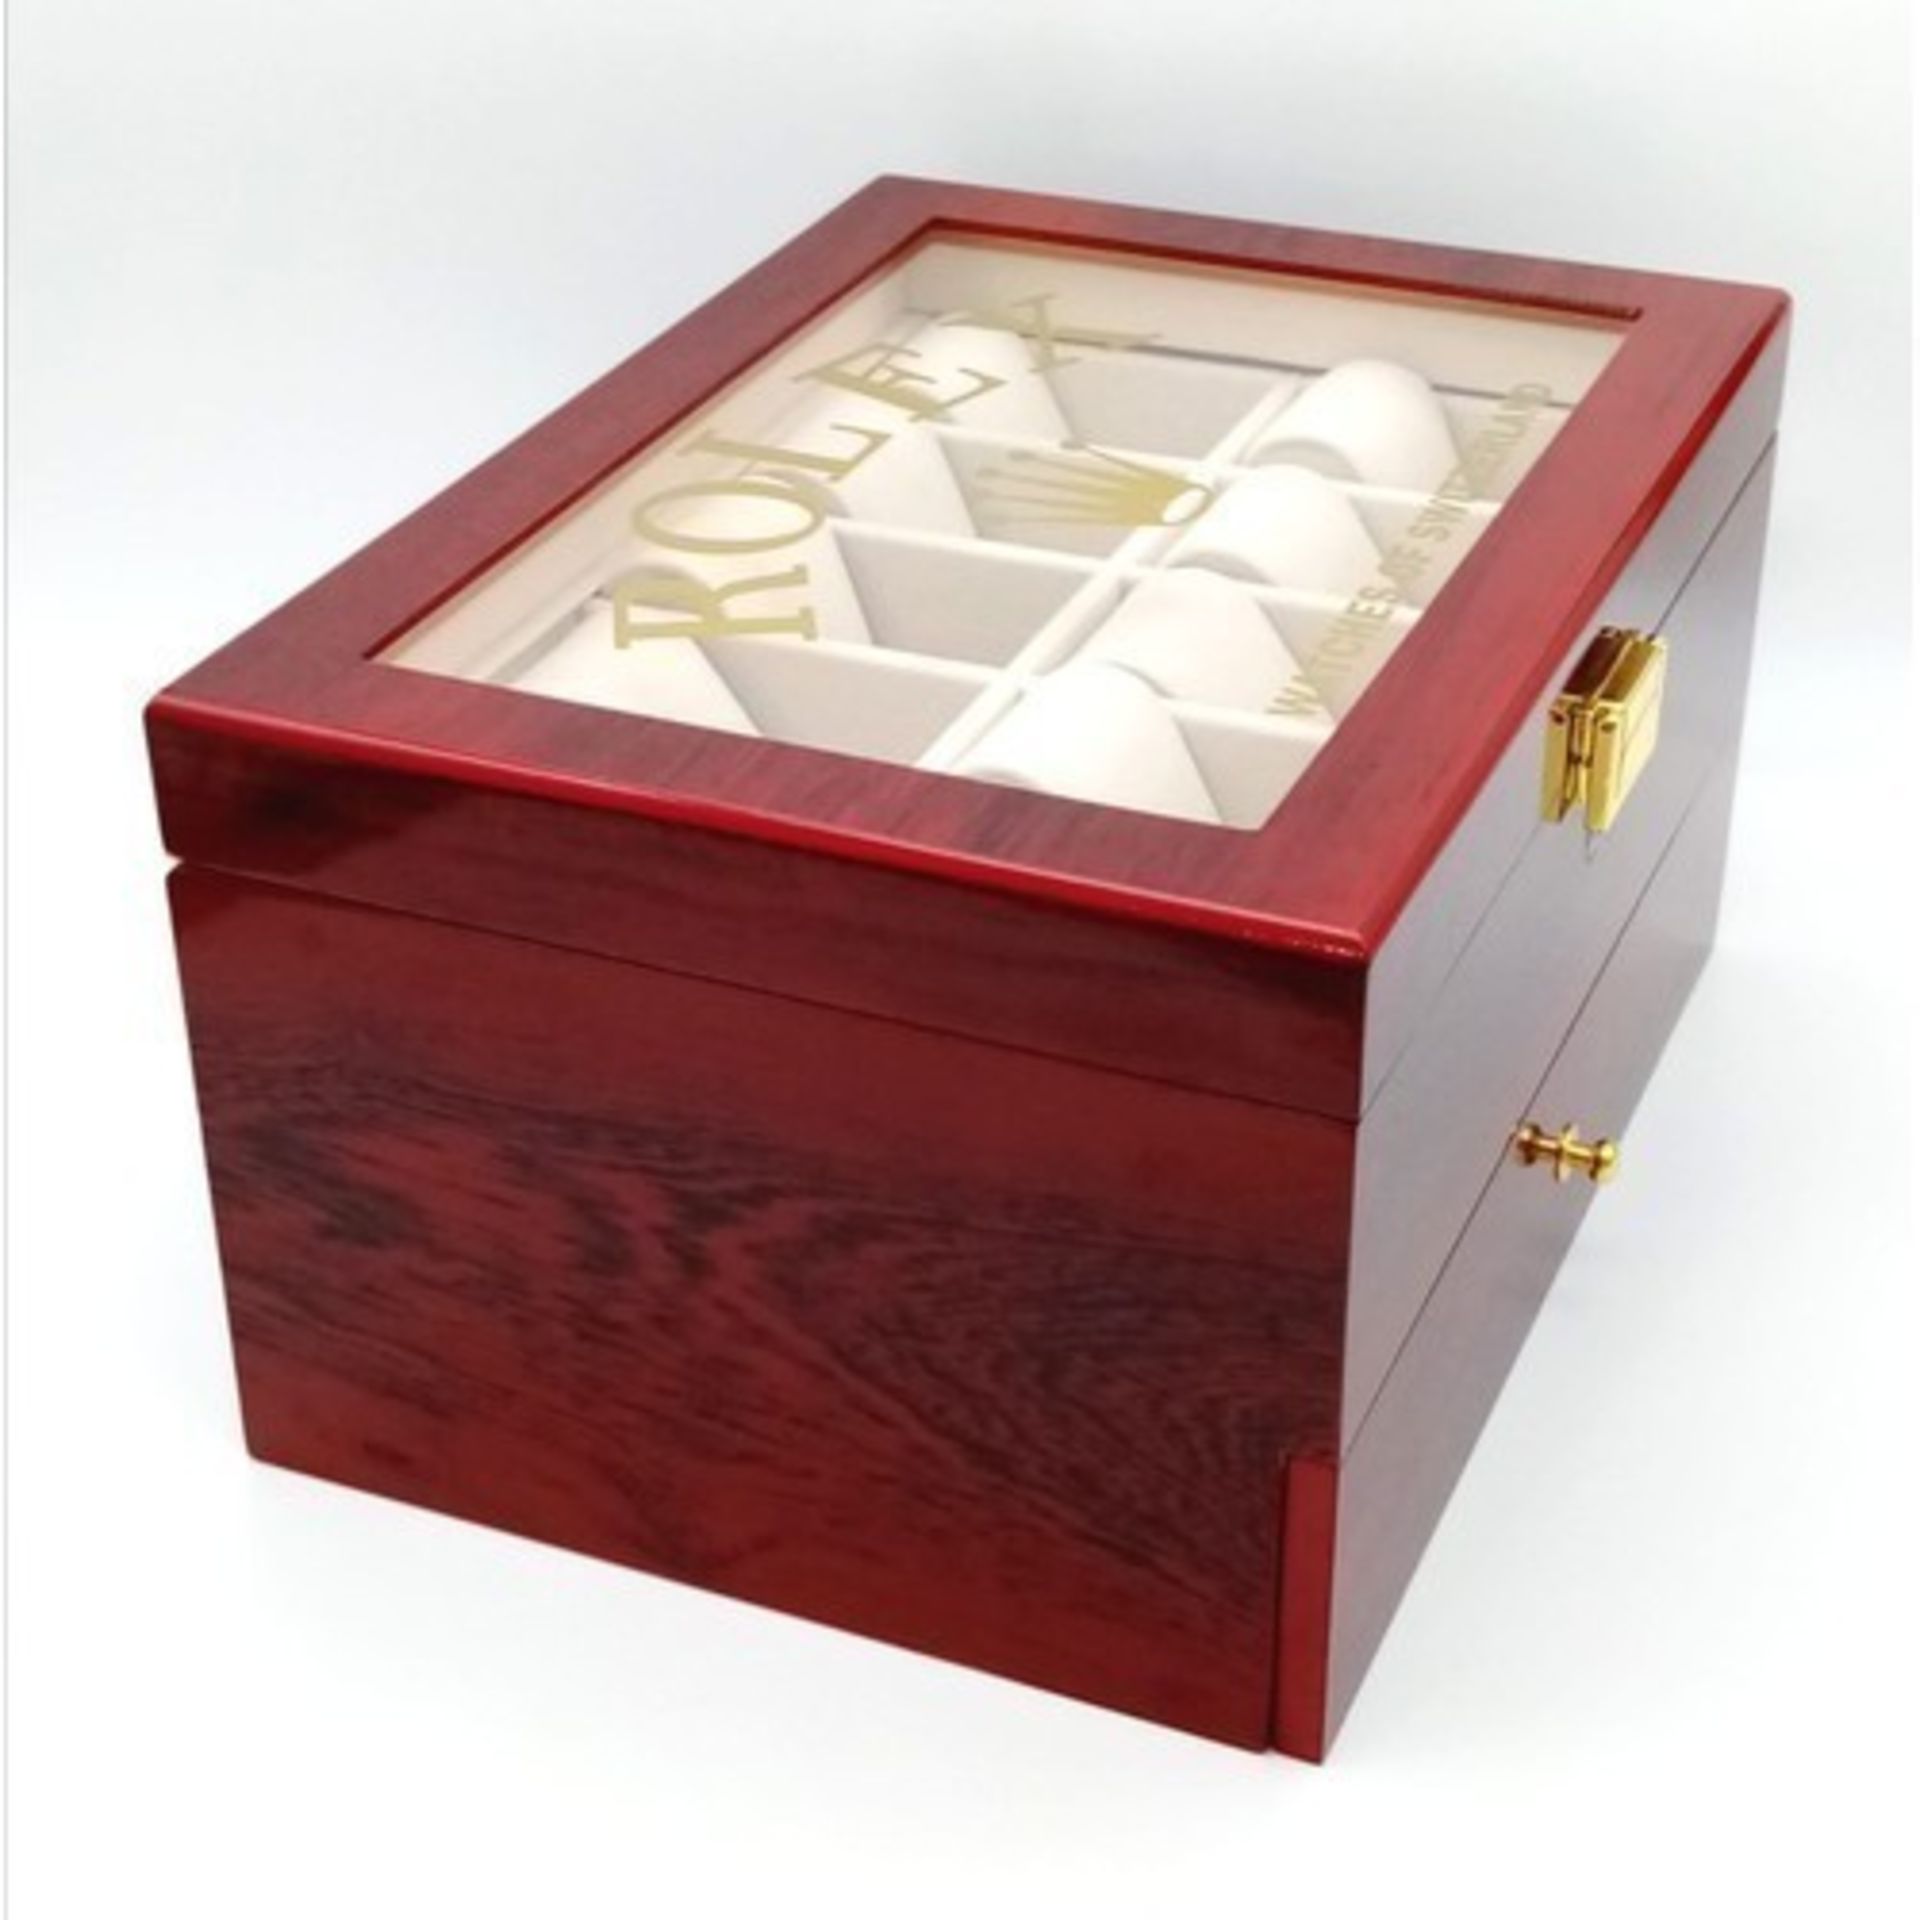 A Two-Tier Elite Watch Display Case - Perfect for Rolex Watches. 20 plush watch spaces on two - Image 4 of 4